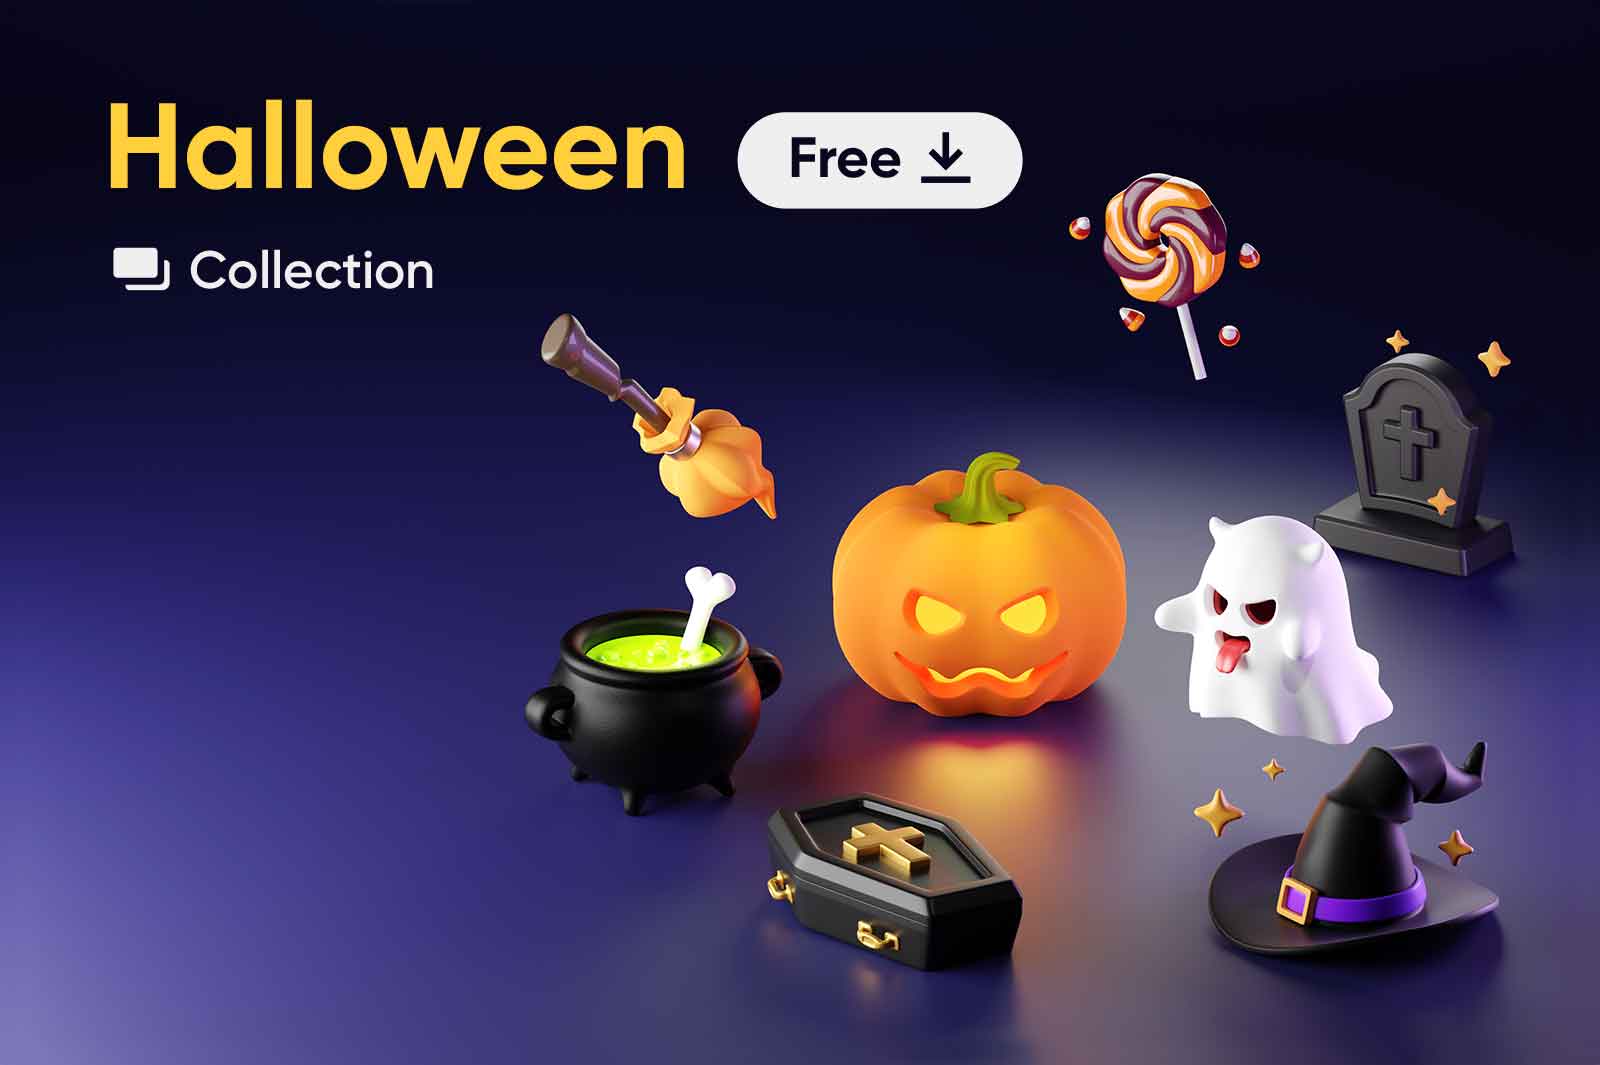 Download free Halloween 3D icons. Blender source, transparent PNG, JPG files. Ghost, pumpkin, tombstone.